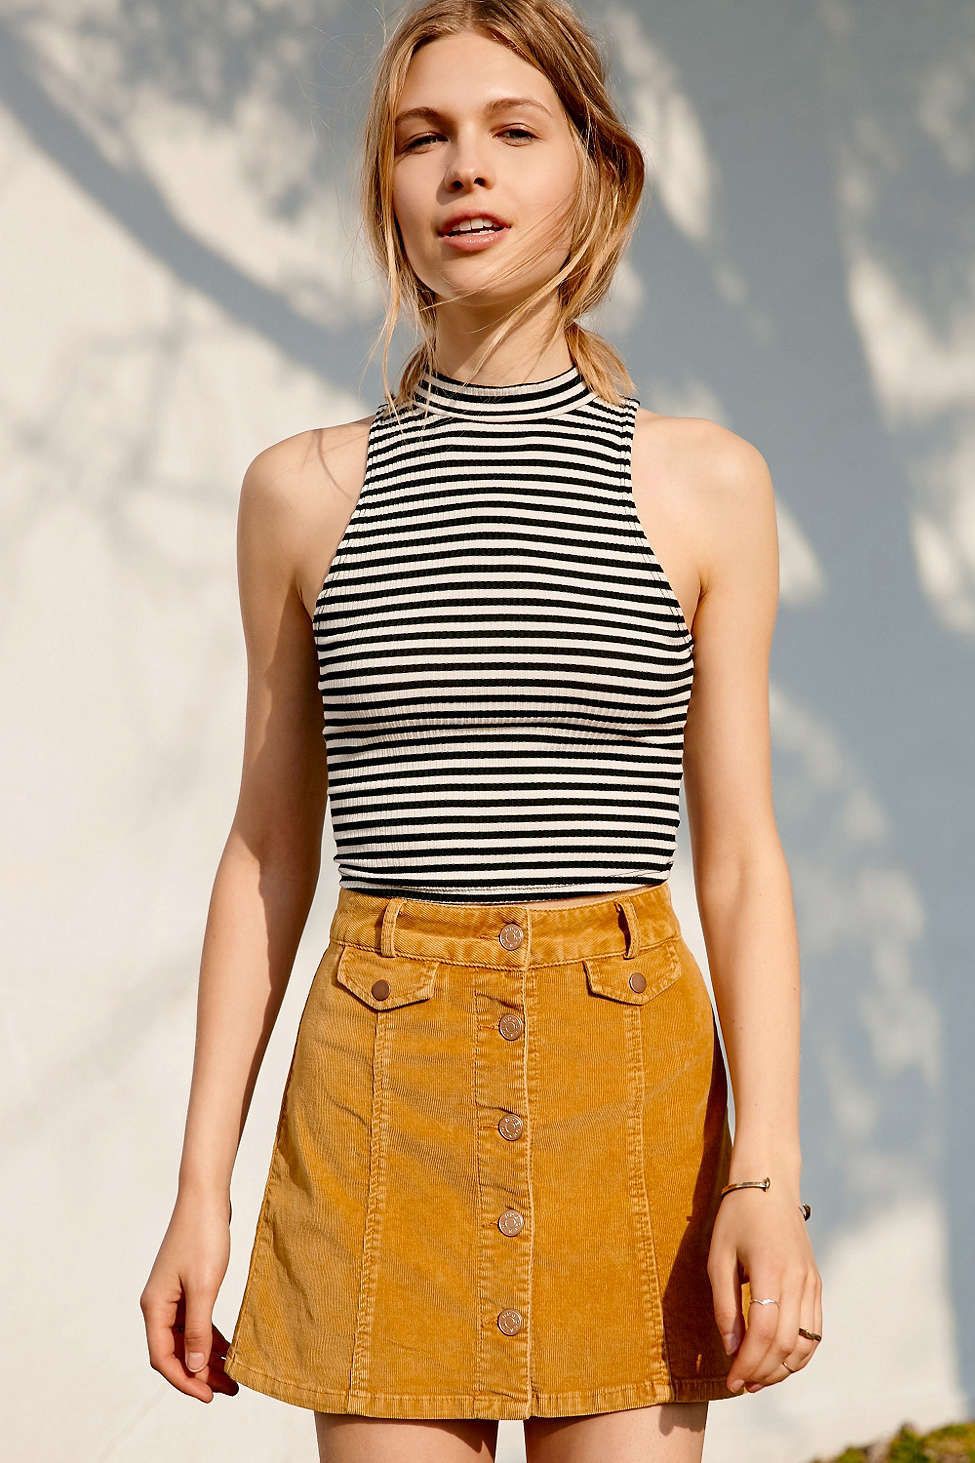 Club outfit ideas for yellow corduroy skirt, Urban Outfitters BDG: shirts,  Skirt Outfits,  Urban Outfitters  